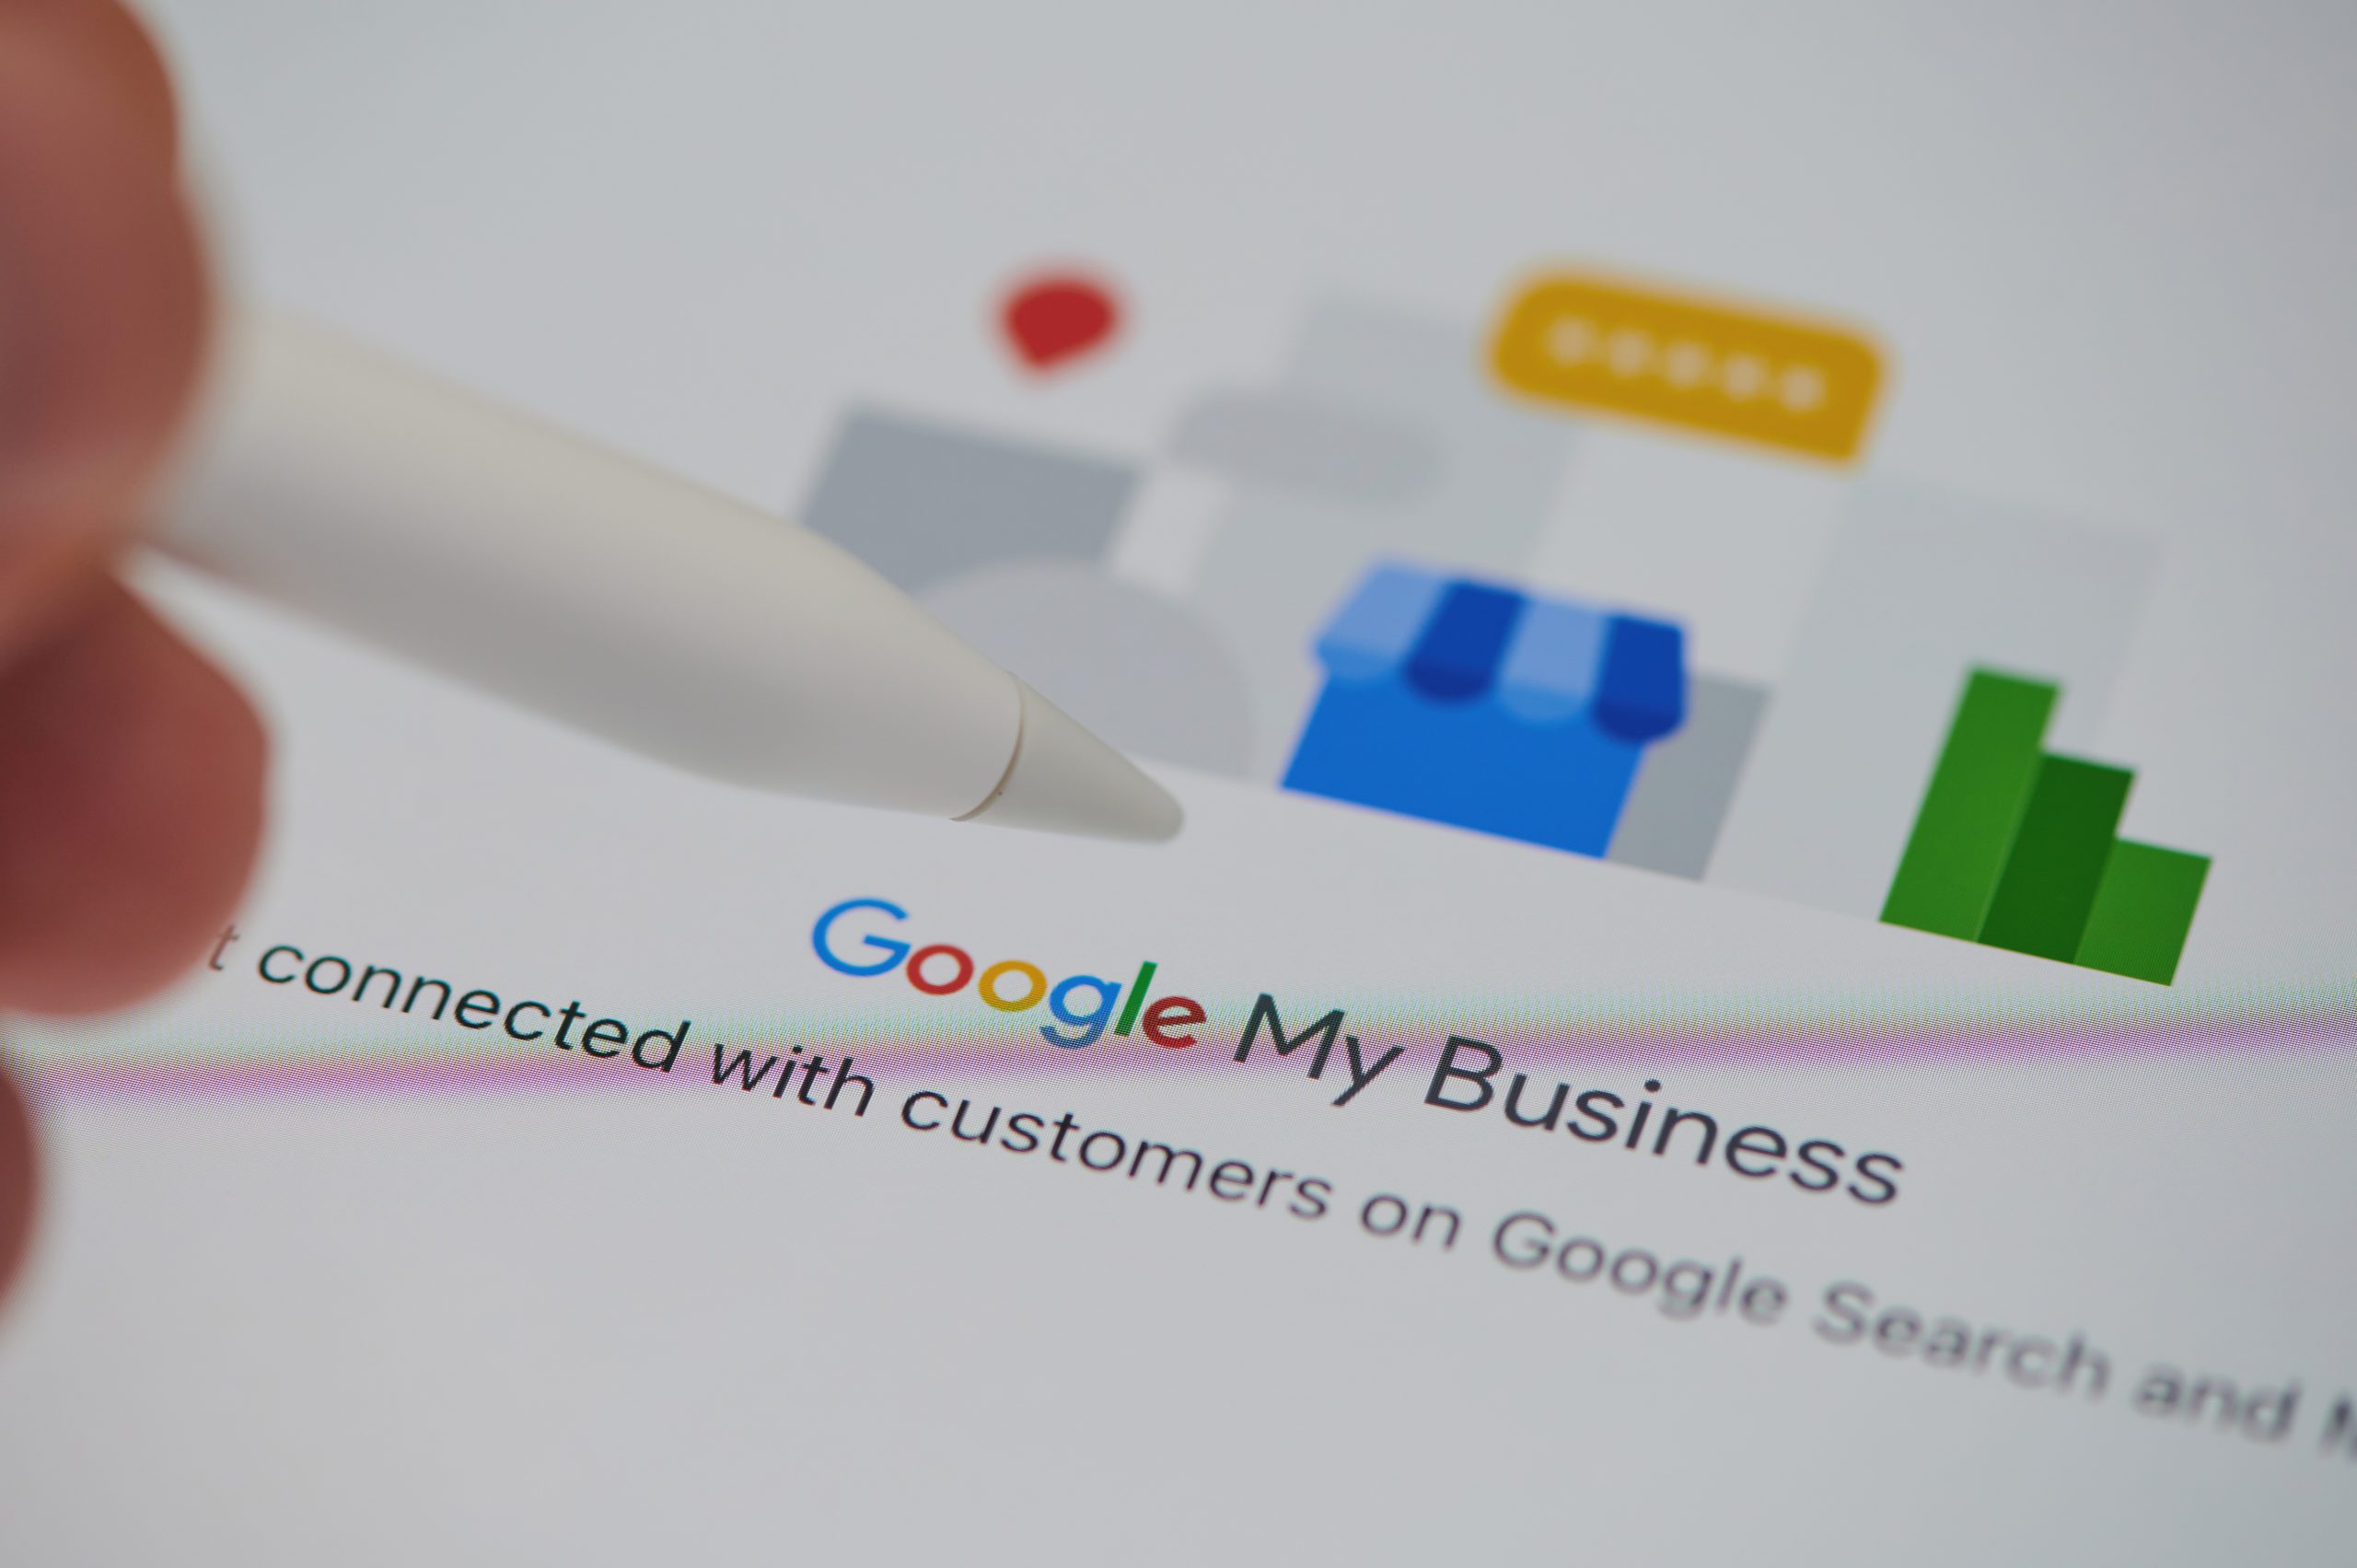 Google My Business page